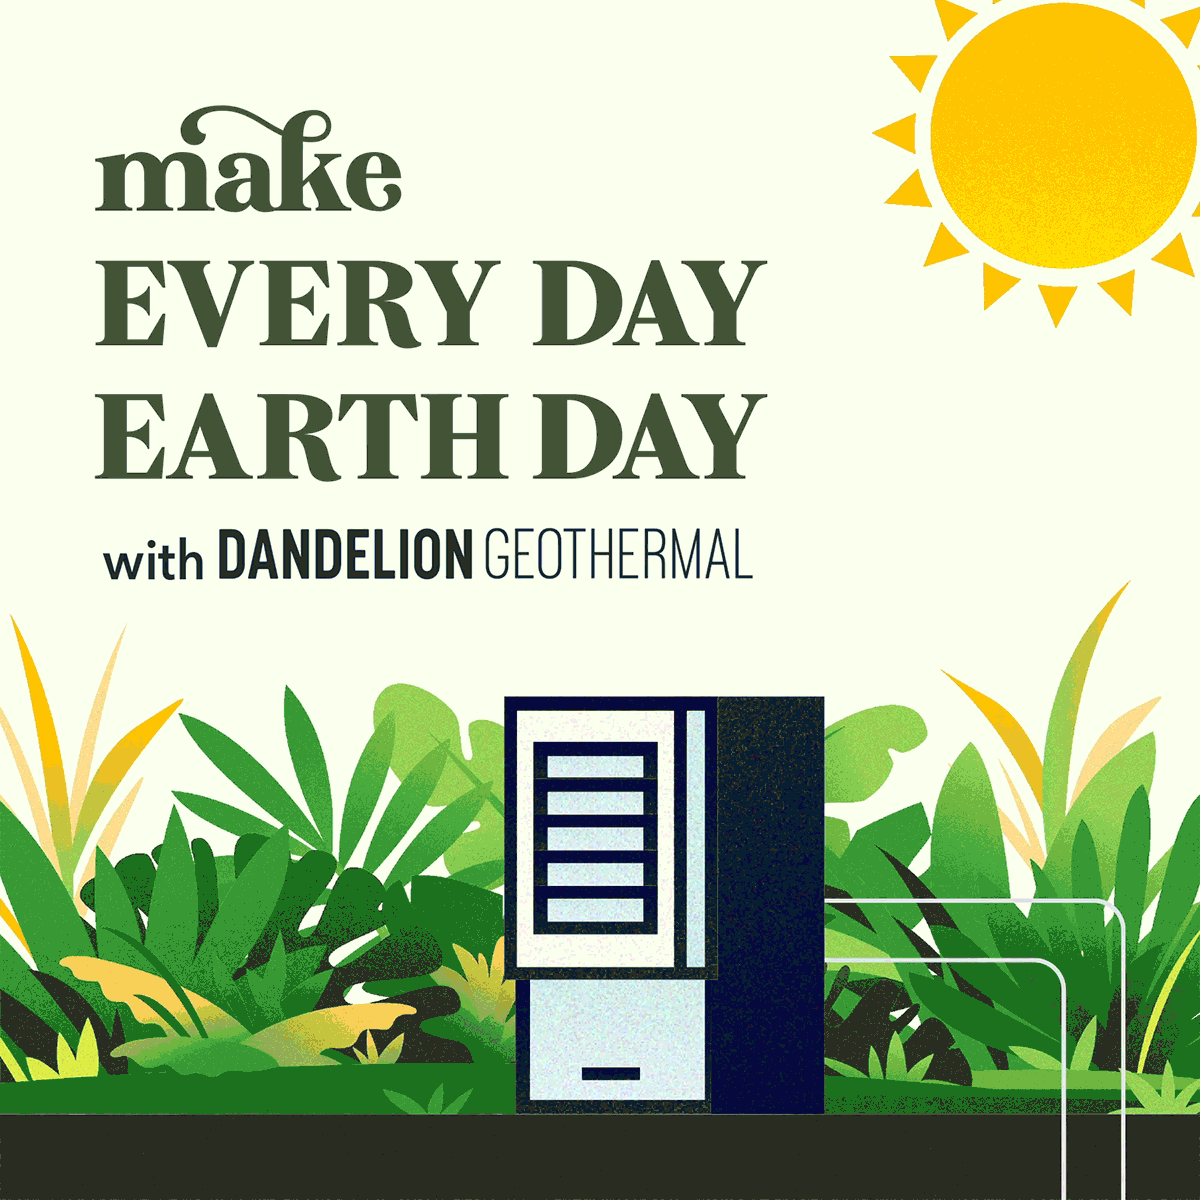 Animated GIF of a dandelion geothermal unit with dots running through the geothermal ground loop turning from blue to red as they pick up heat. There are plants in the background and a sun spinning in the sky Headline text says 'Make Every day Earth day wiht Dandelion Geothermal'